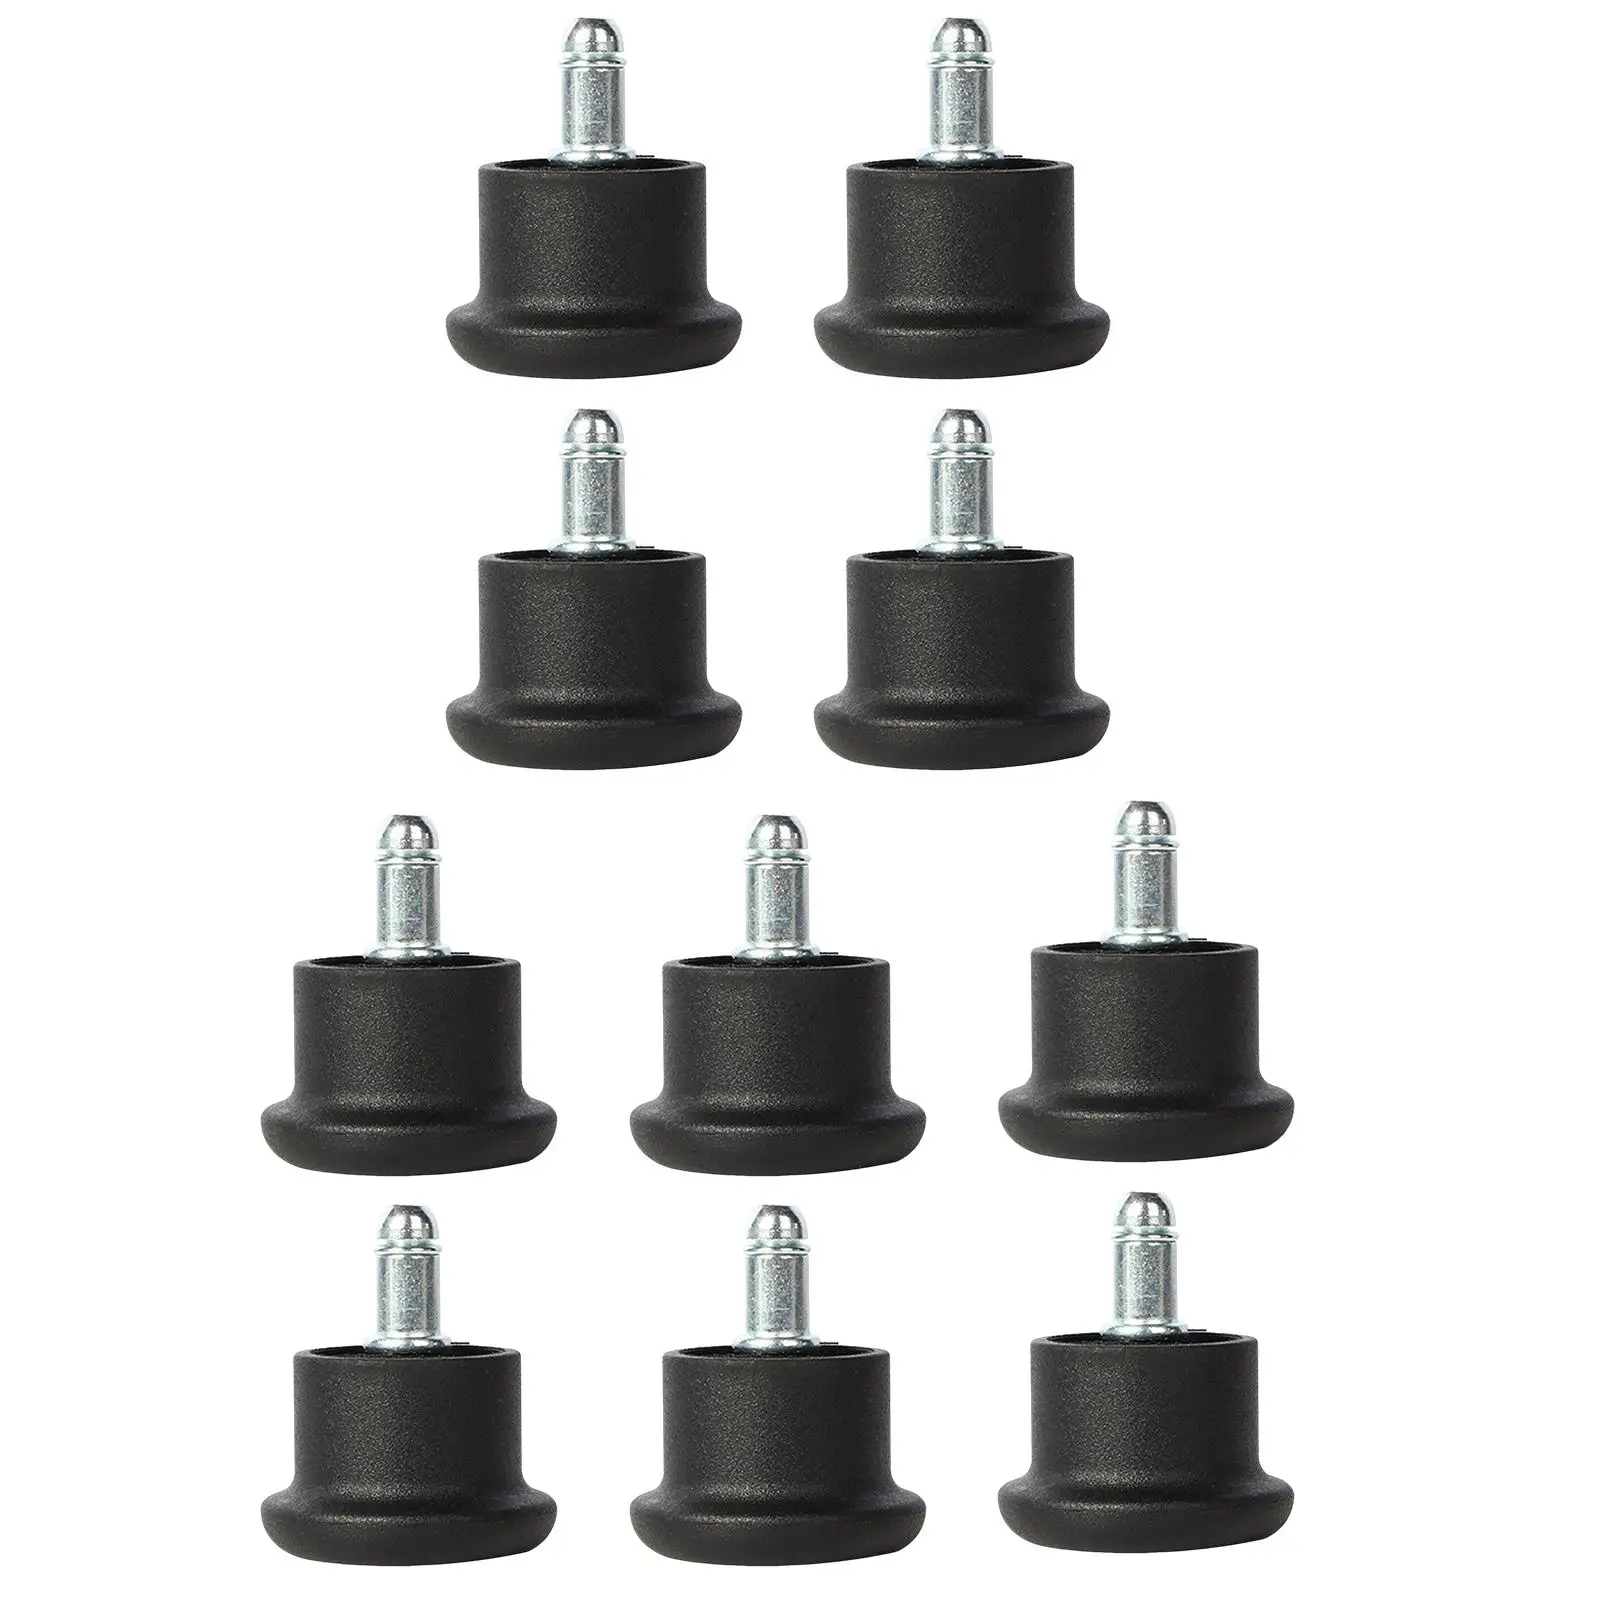 10Pcs Fixed Stationary Caster for Office Chair Stool Glides Stationary Feet Pads Low Profile Bell Glides for Cabinet Accessories